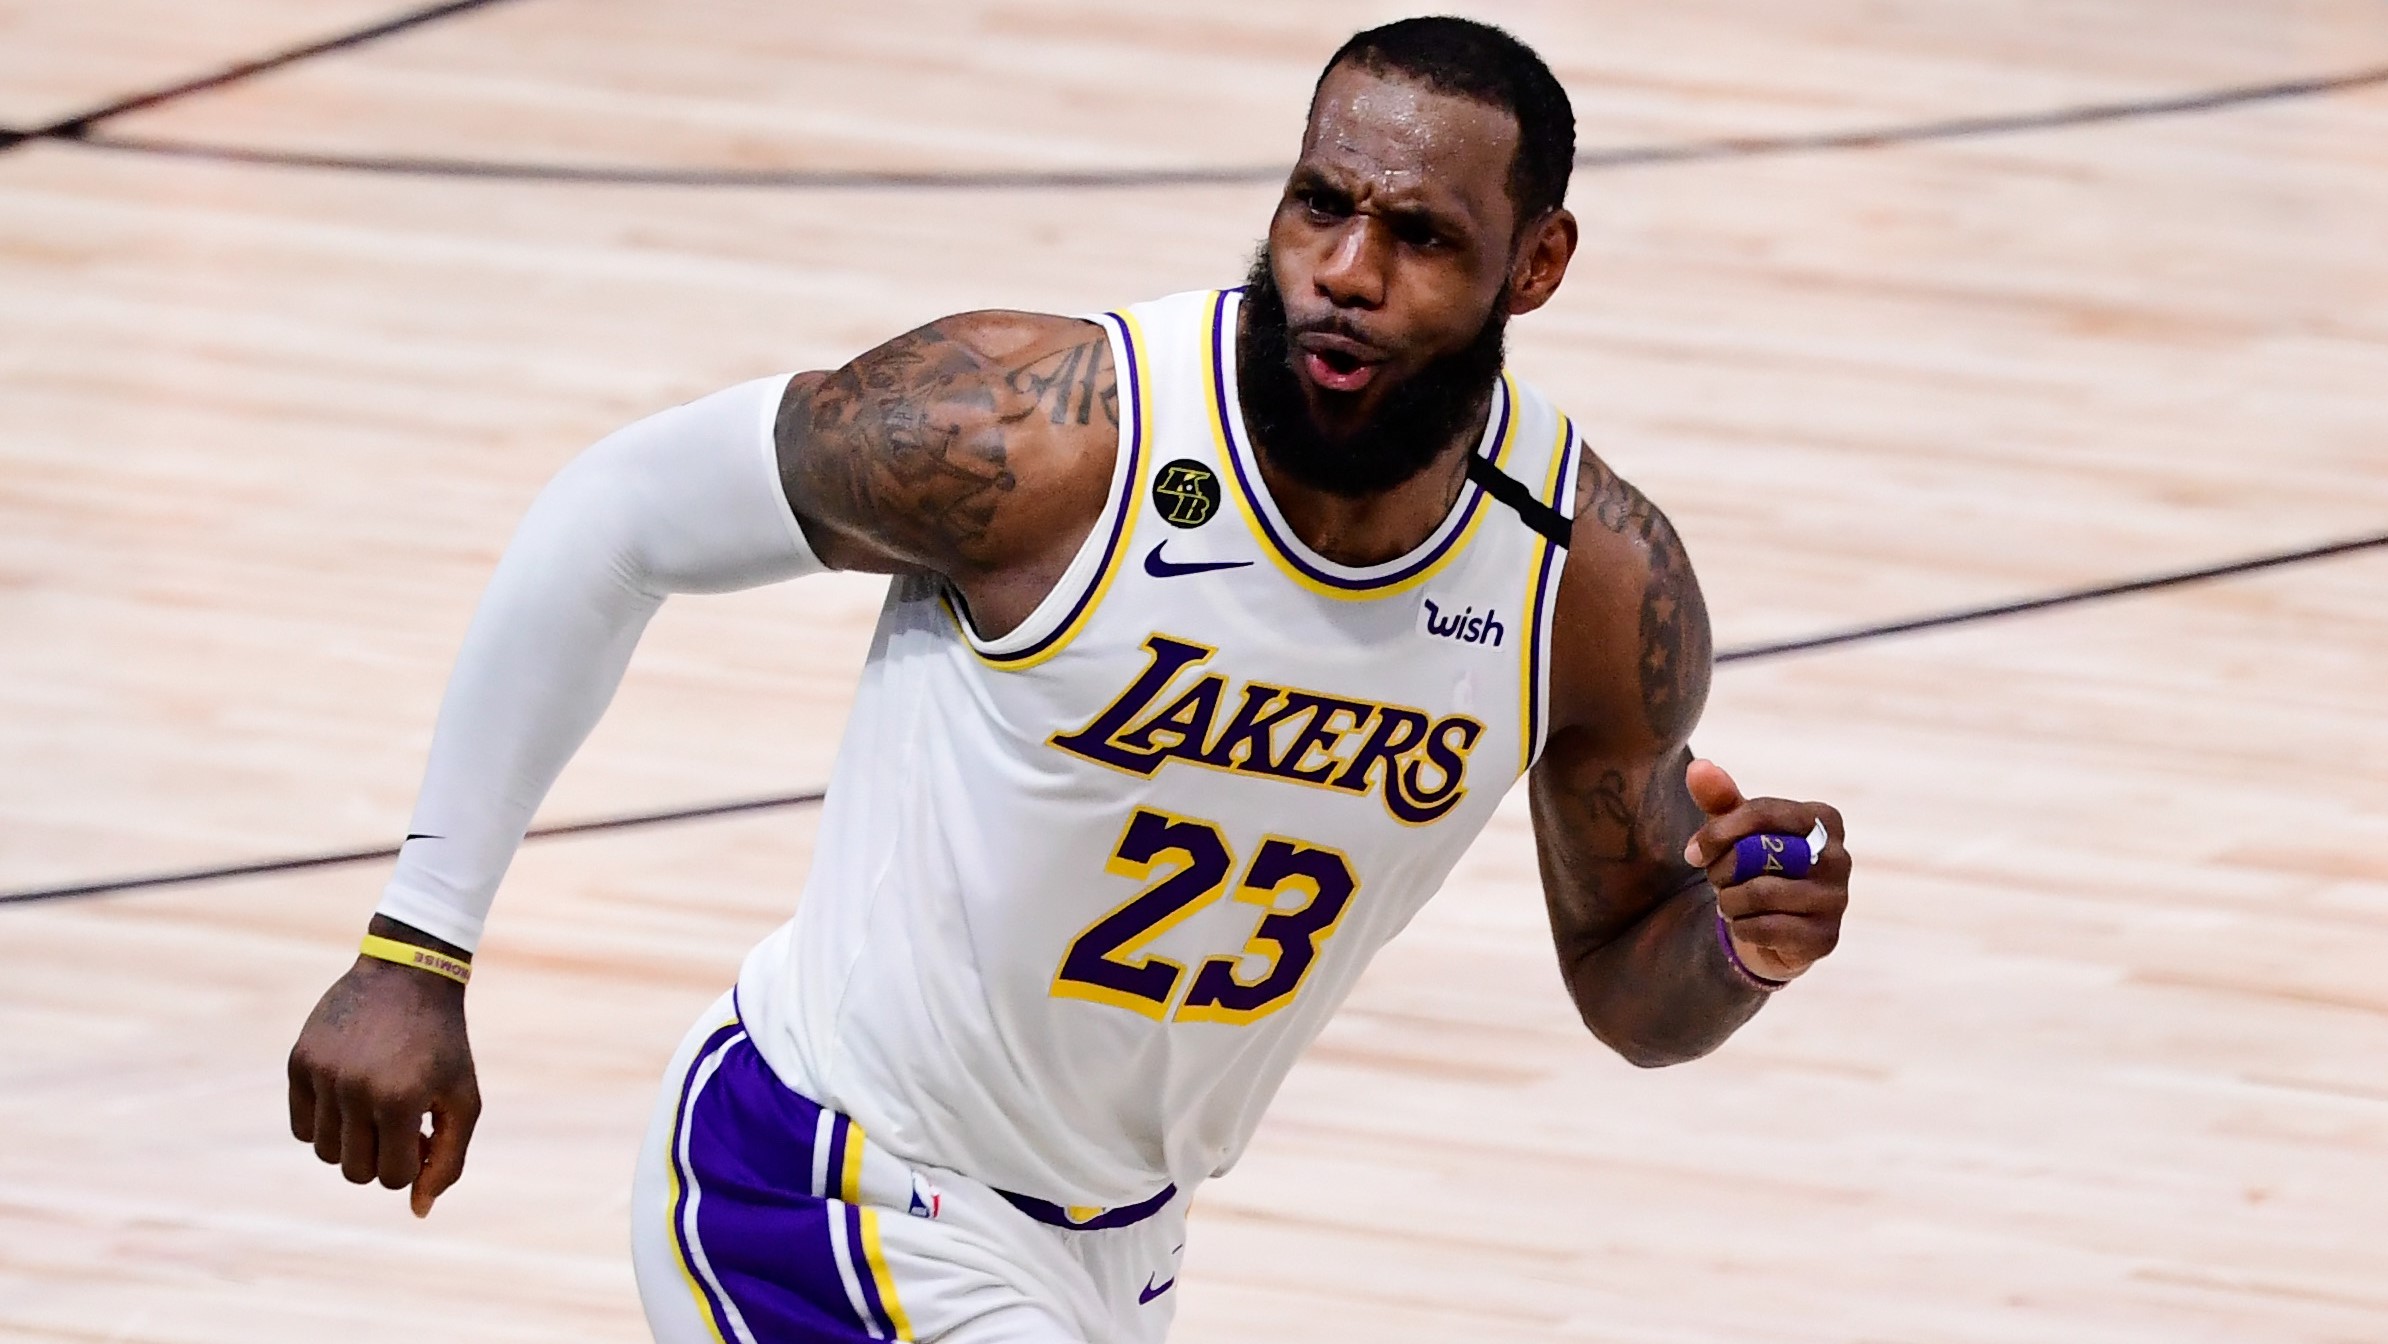 NBA live stream 2020/21: how to watch 